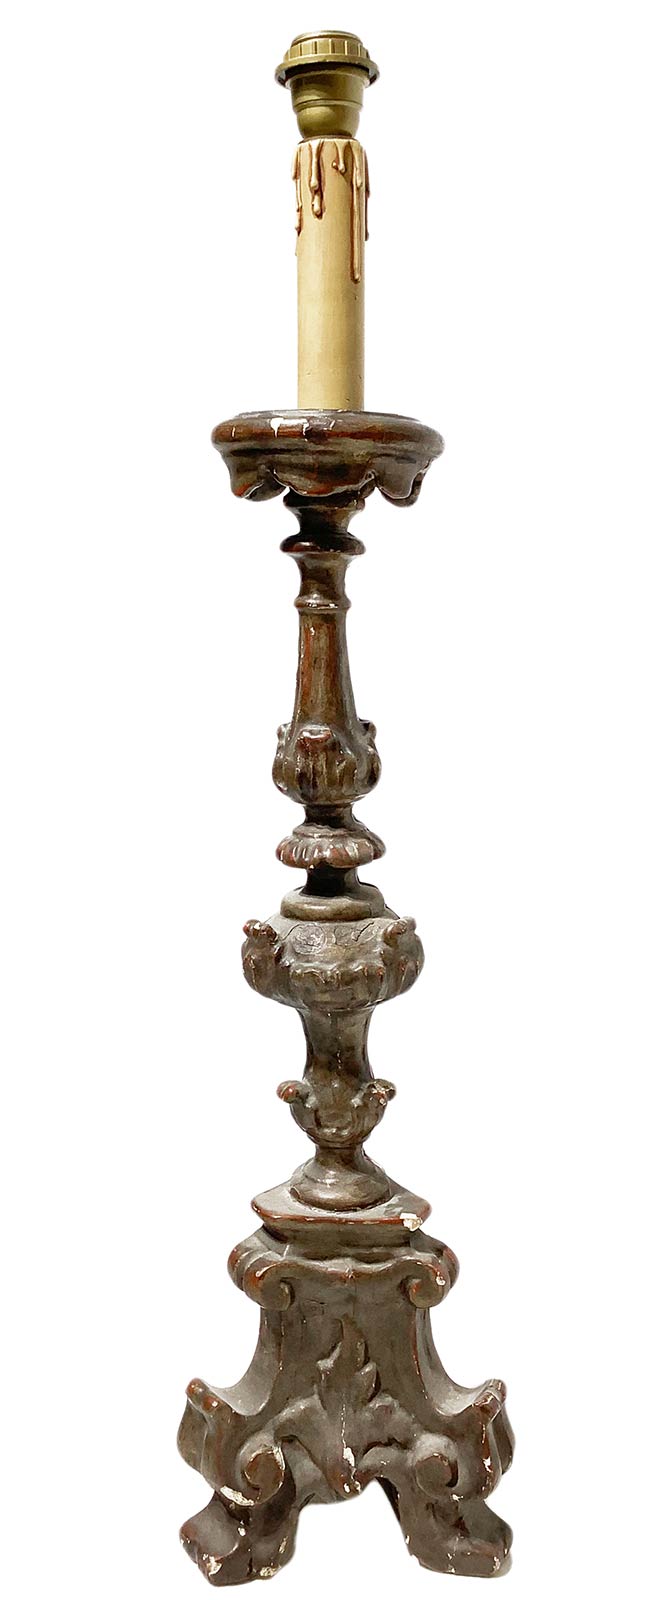 Candlestick in lacquered wood, eighteenth century. H 70 cm. - Image 4 of 7